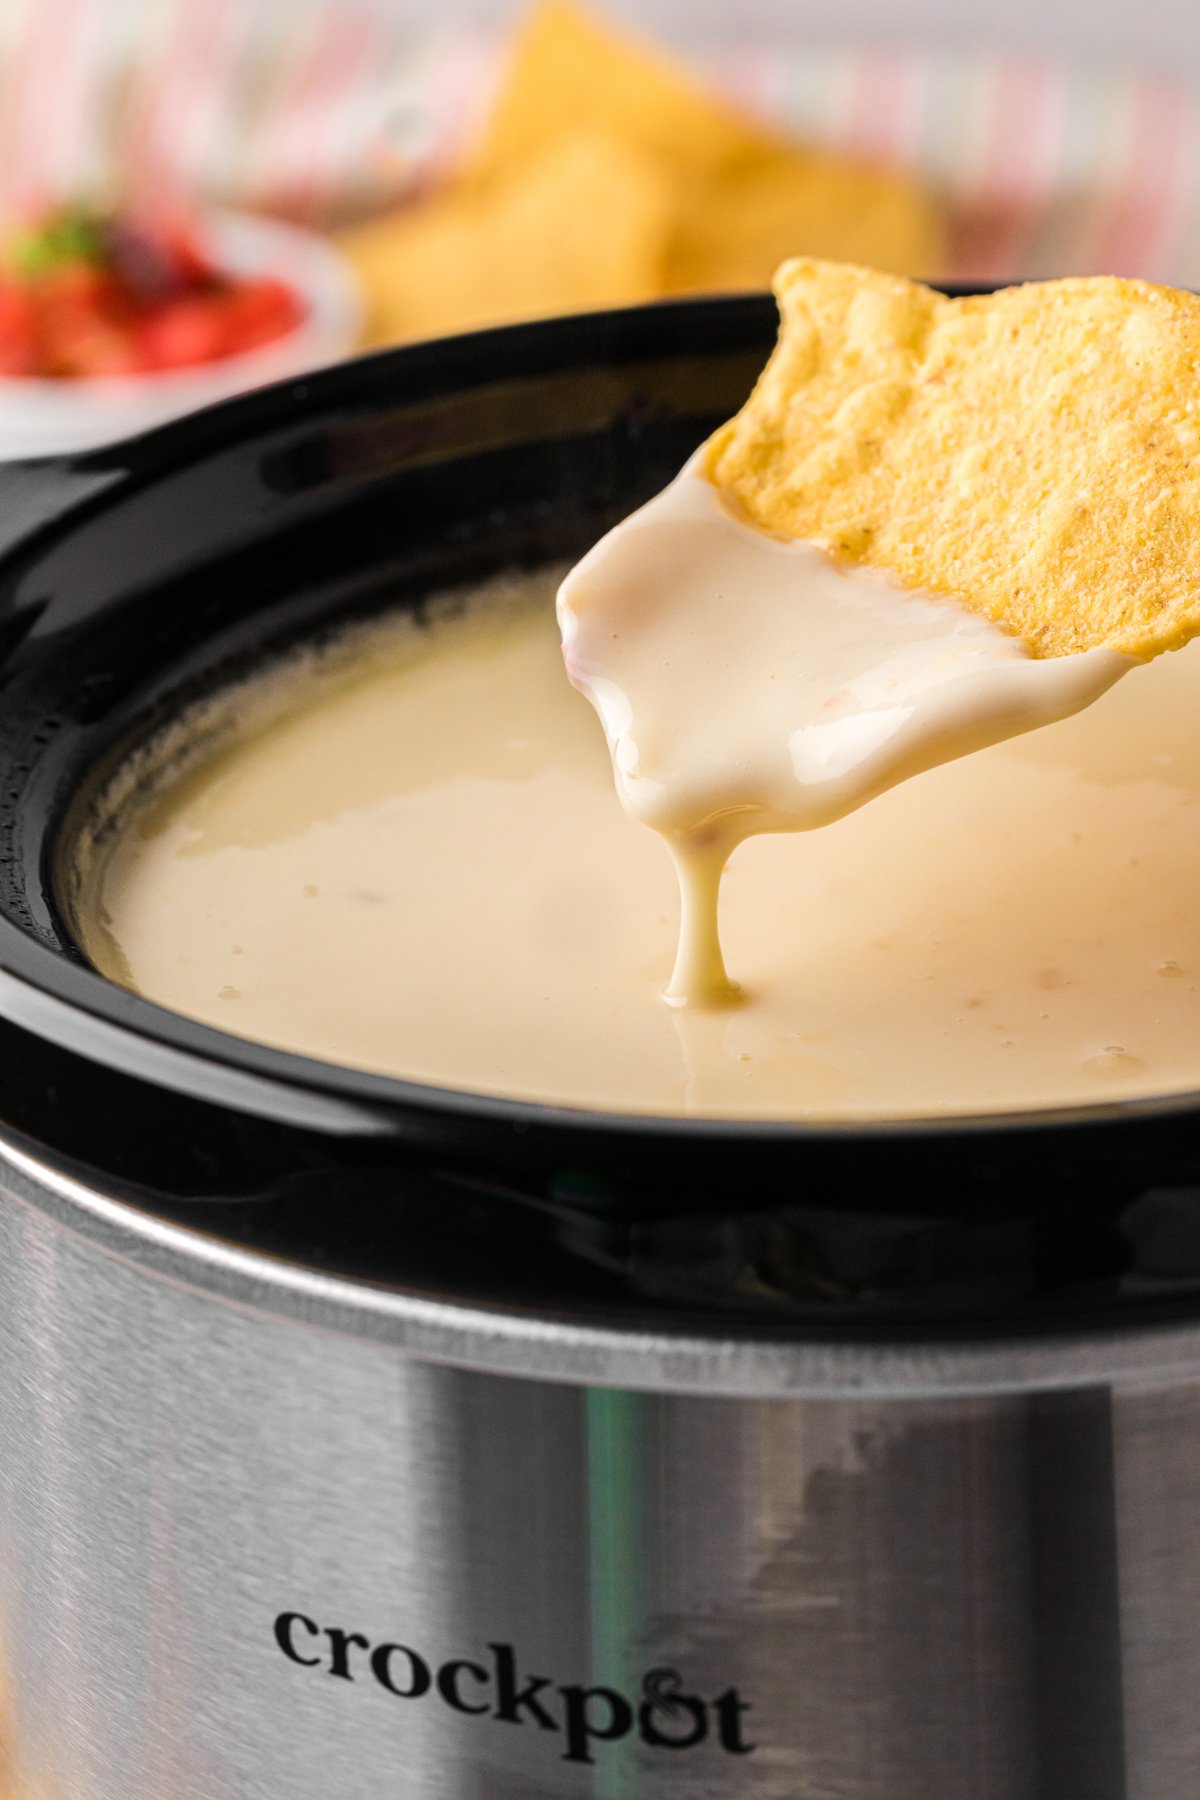 dipping a chip into slow cooker restaurant style queso.